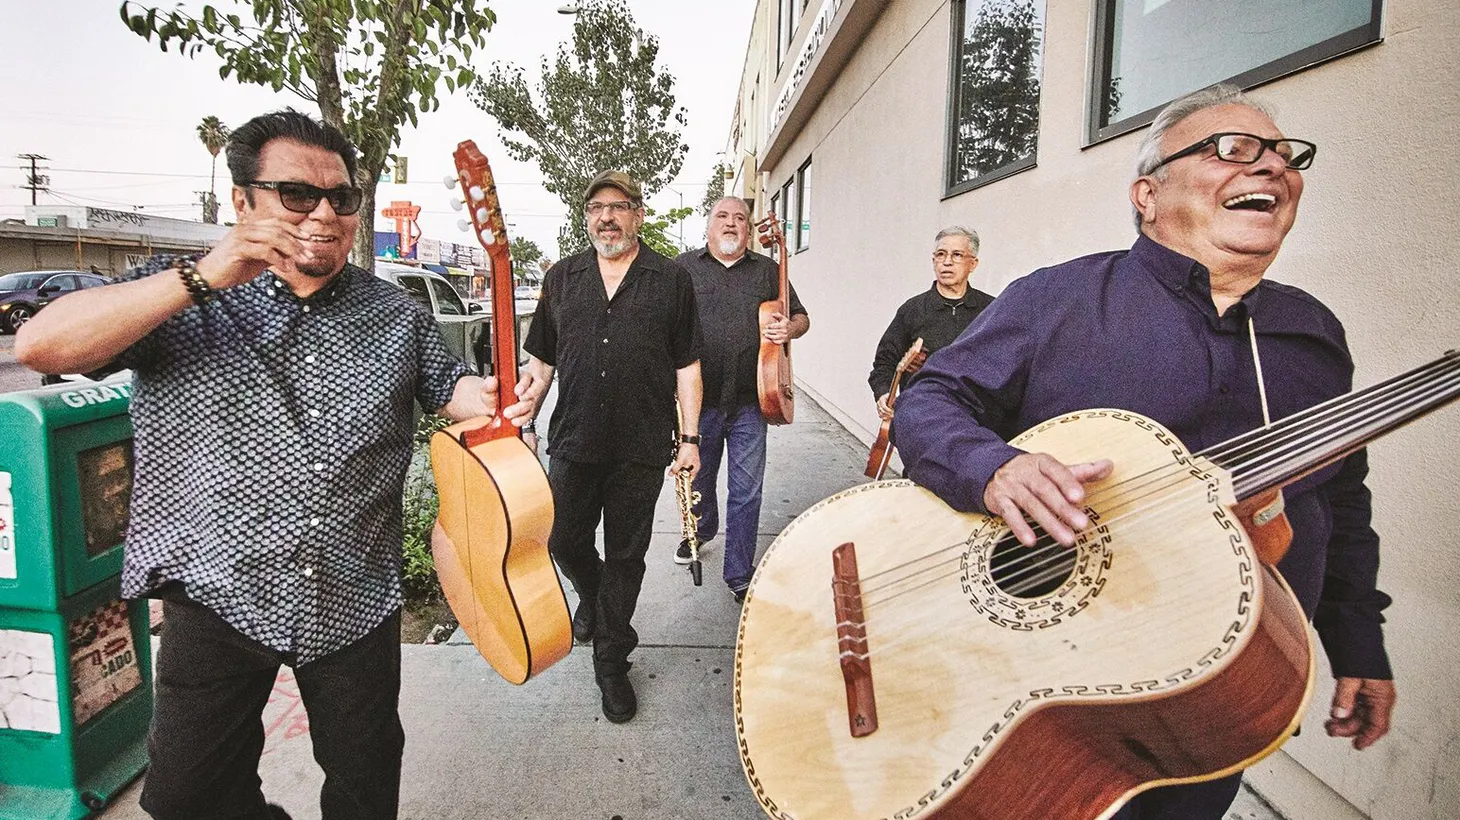 East LA icons Los Lobos released their first ever Christmas album Llego Navidad earlier this fall. The album features reimagined versions of traditional holiday songs from across North, Central and South America.